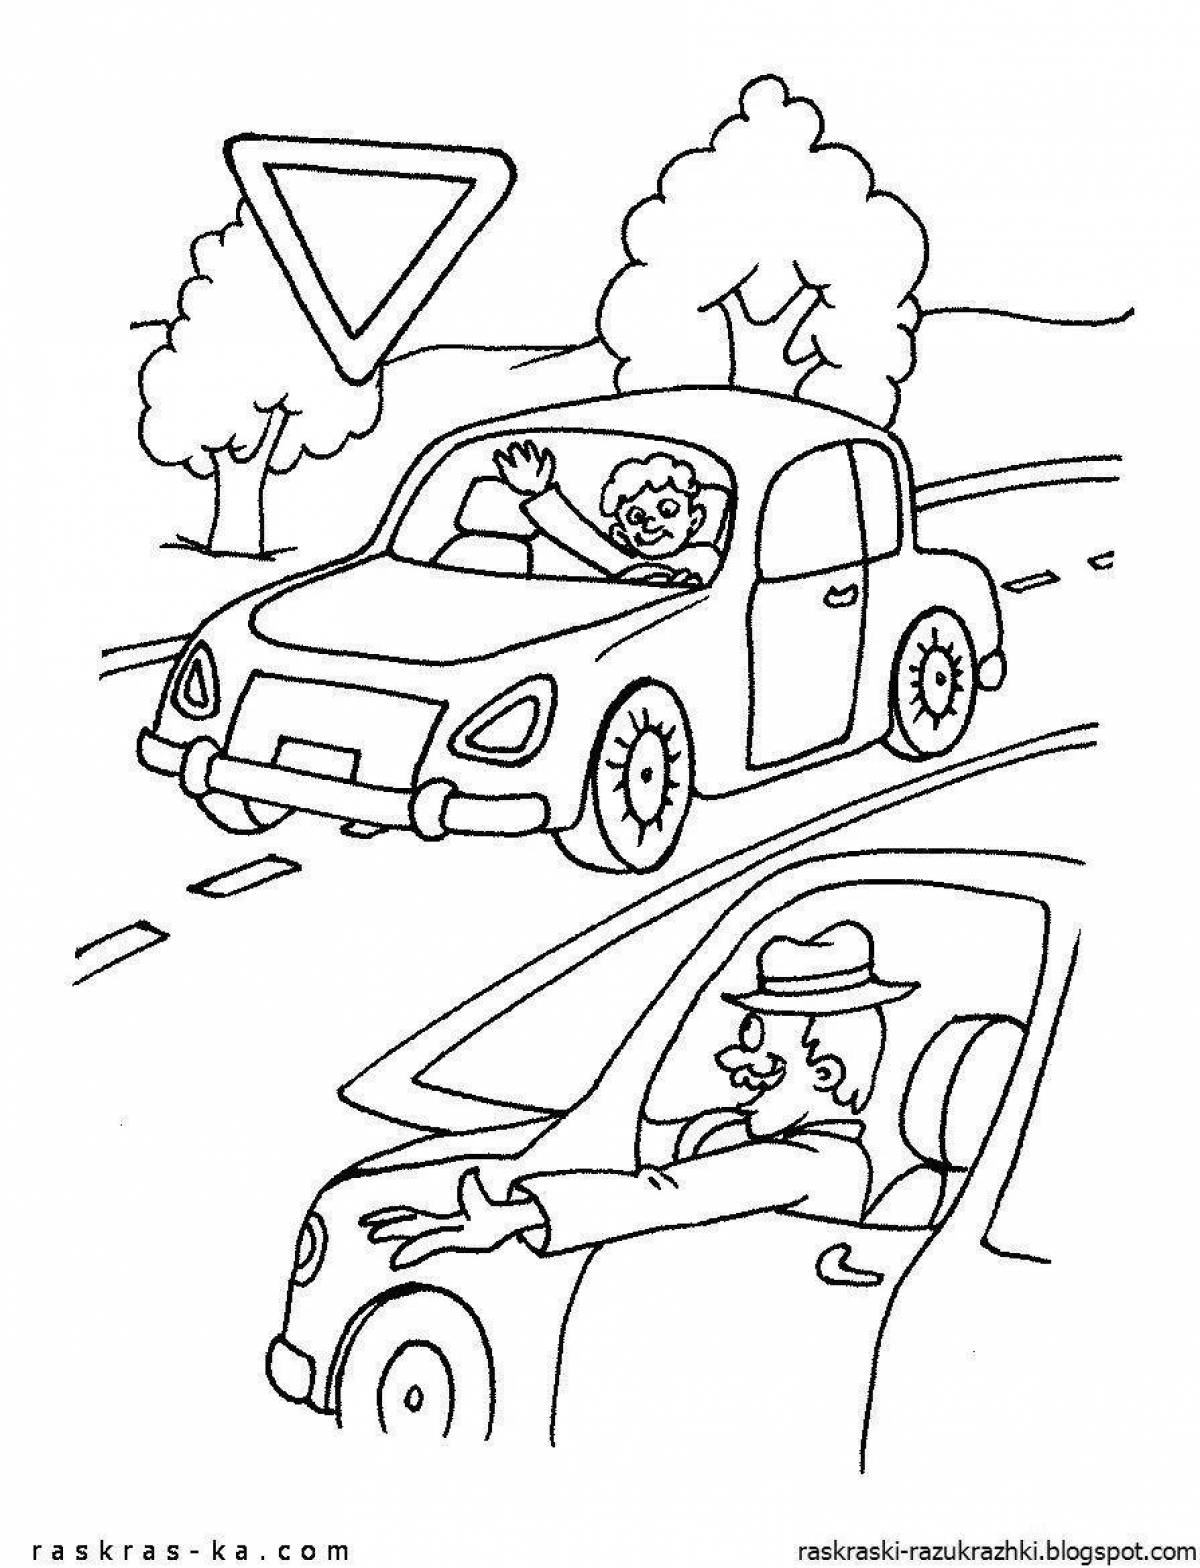 Fun rules of the road coloring book for schoolchildren